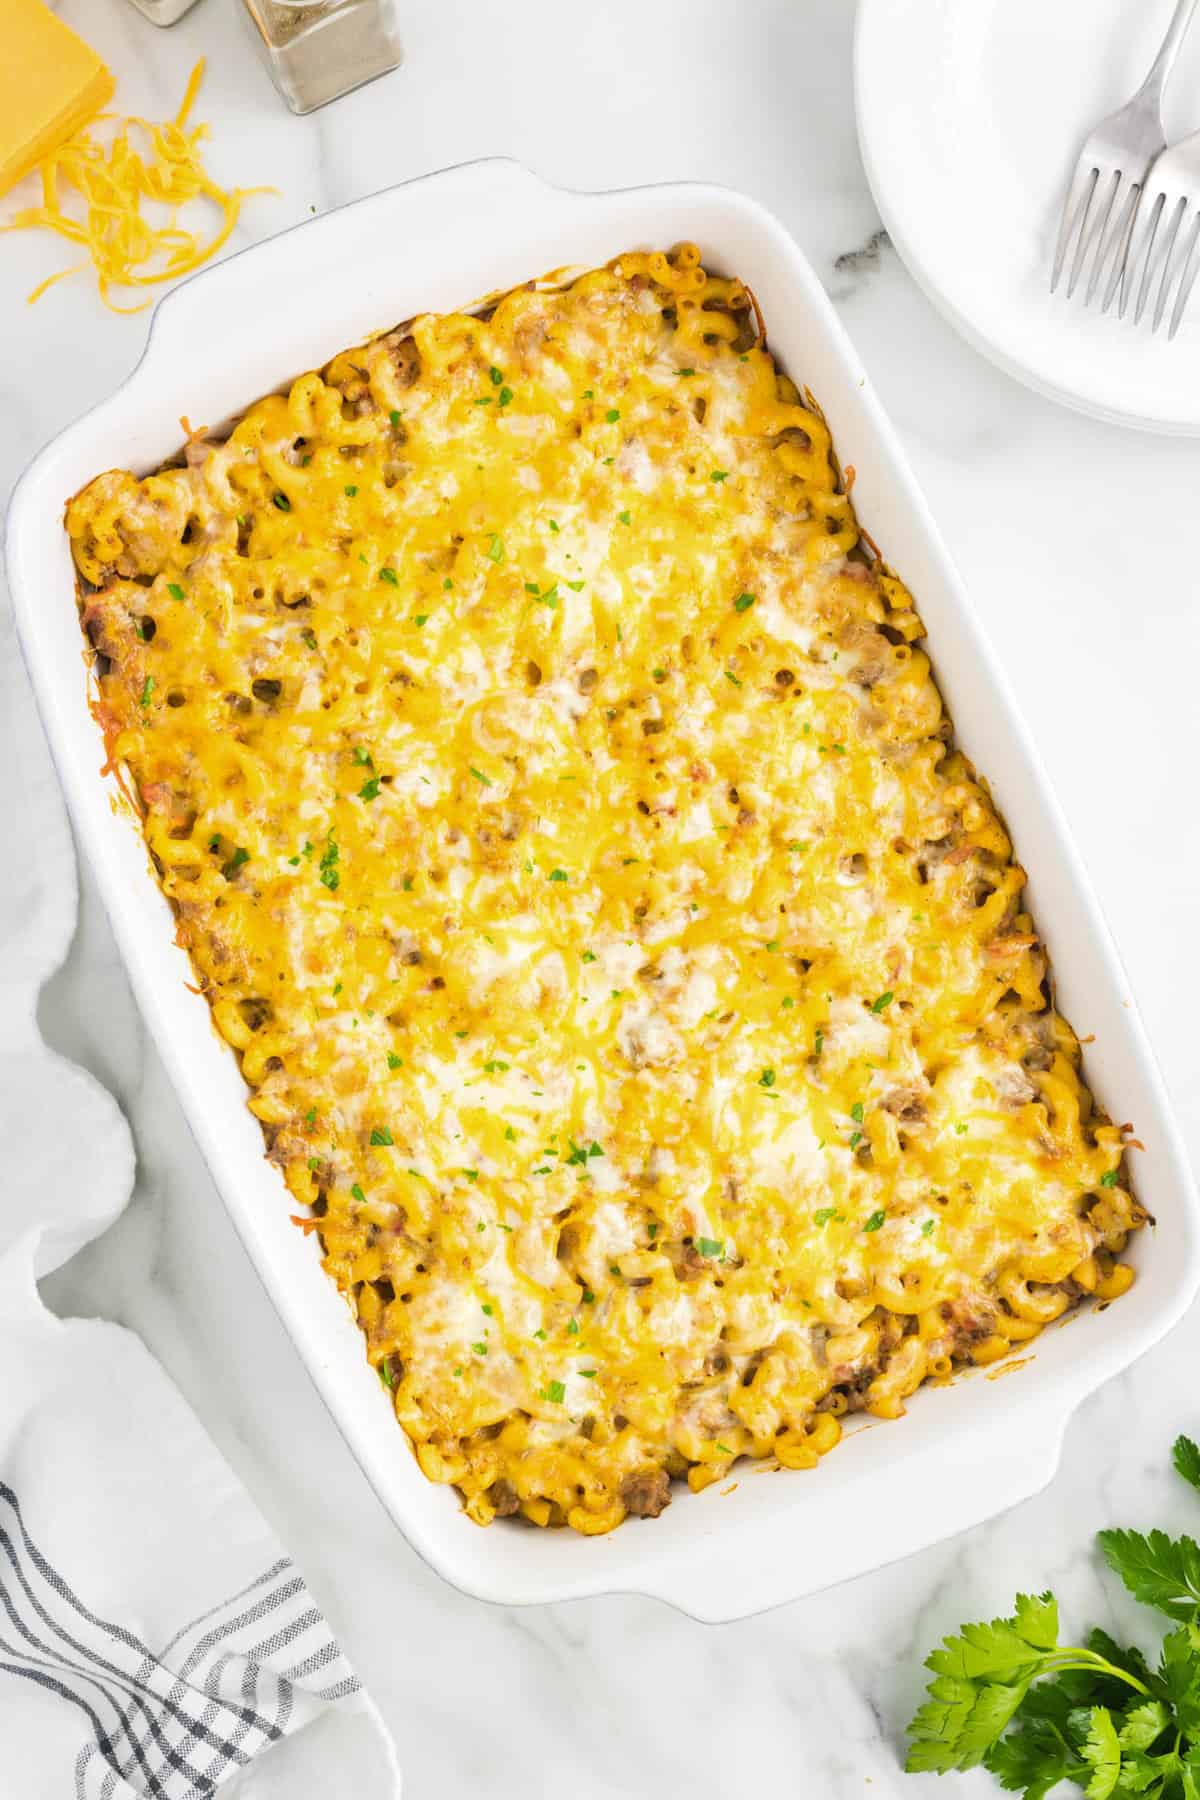 Cheeseburger Casserole Topped with Melted Cheese in Baking Dish Right Out of the Oven